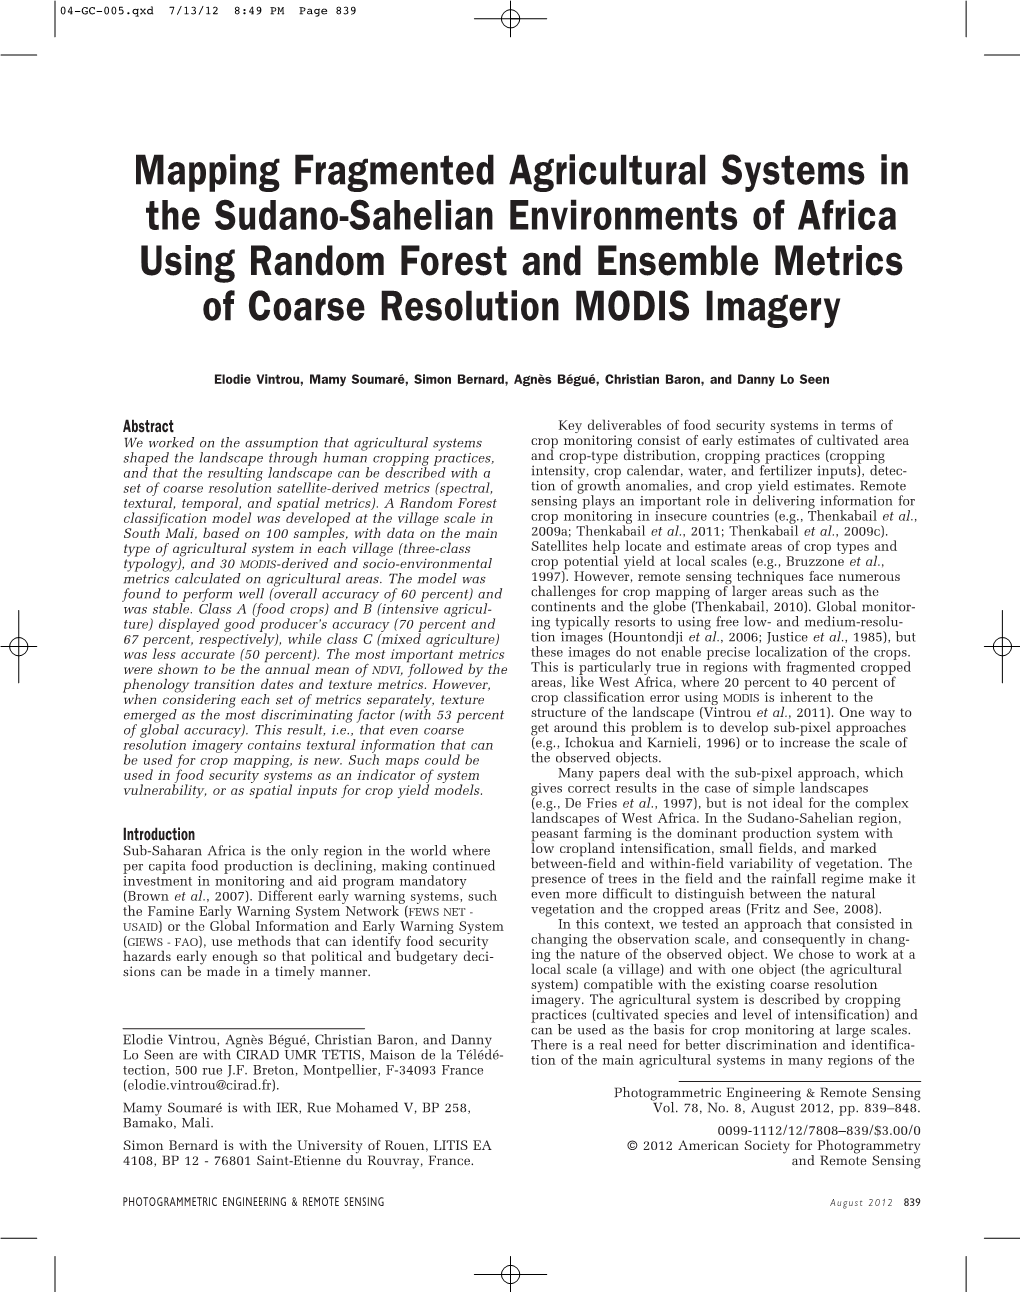 Mapping Fragmented Agricultural Systems in the Sudano-Sahelian Environments of Africa Using Random Forest and Ensemble Metrics of Coarse Resolution MODIS Imagery